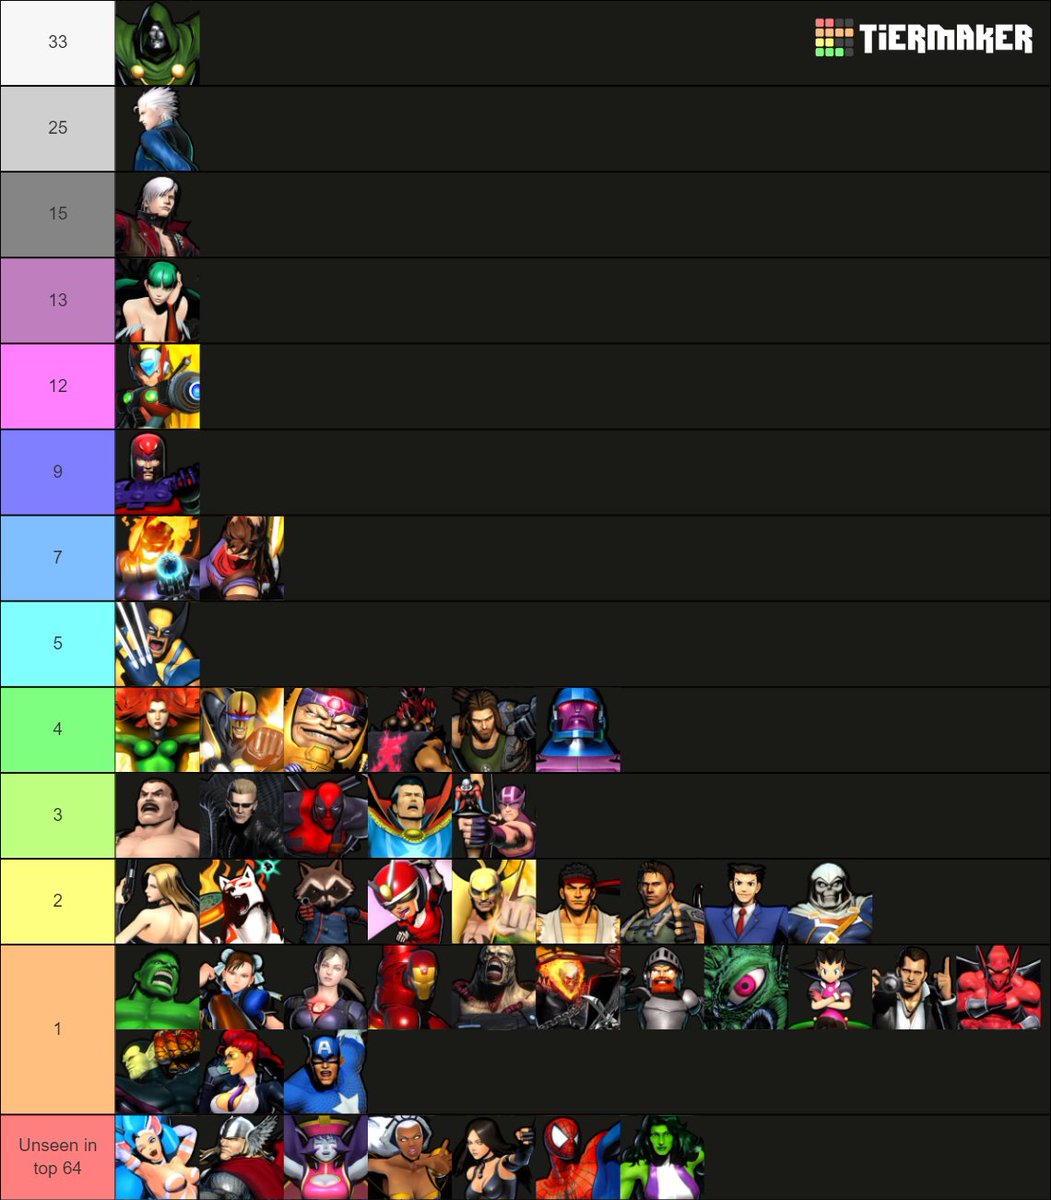 Here is a graphic for the character usage in top 64 placings for #UltimateMarvelvsCapcom3 at #Evo2023